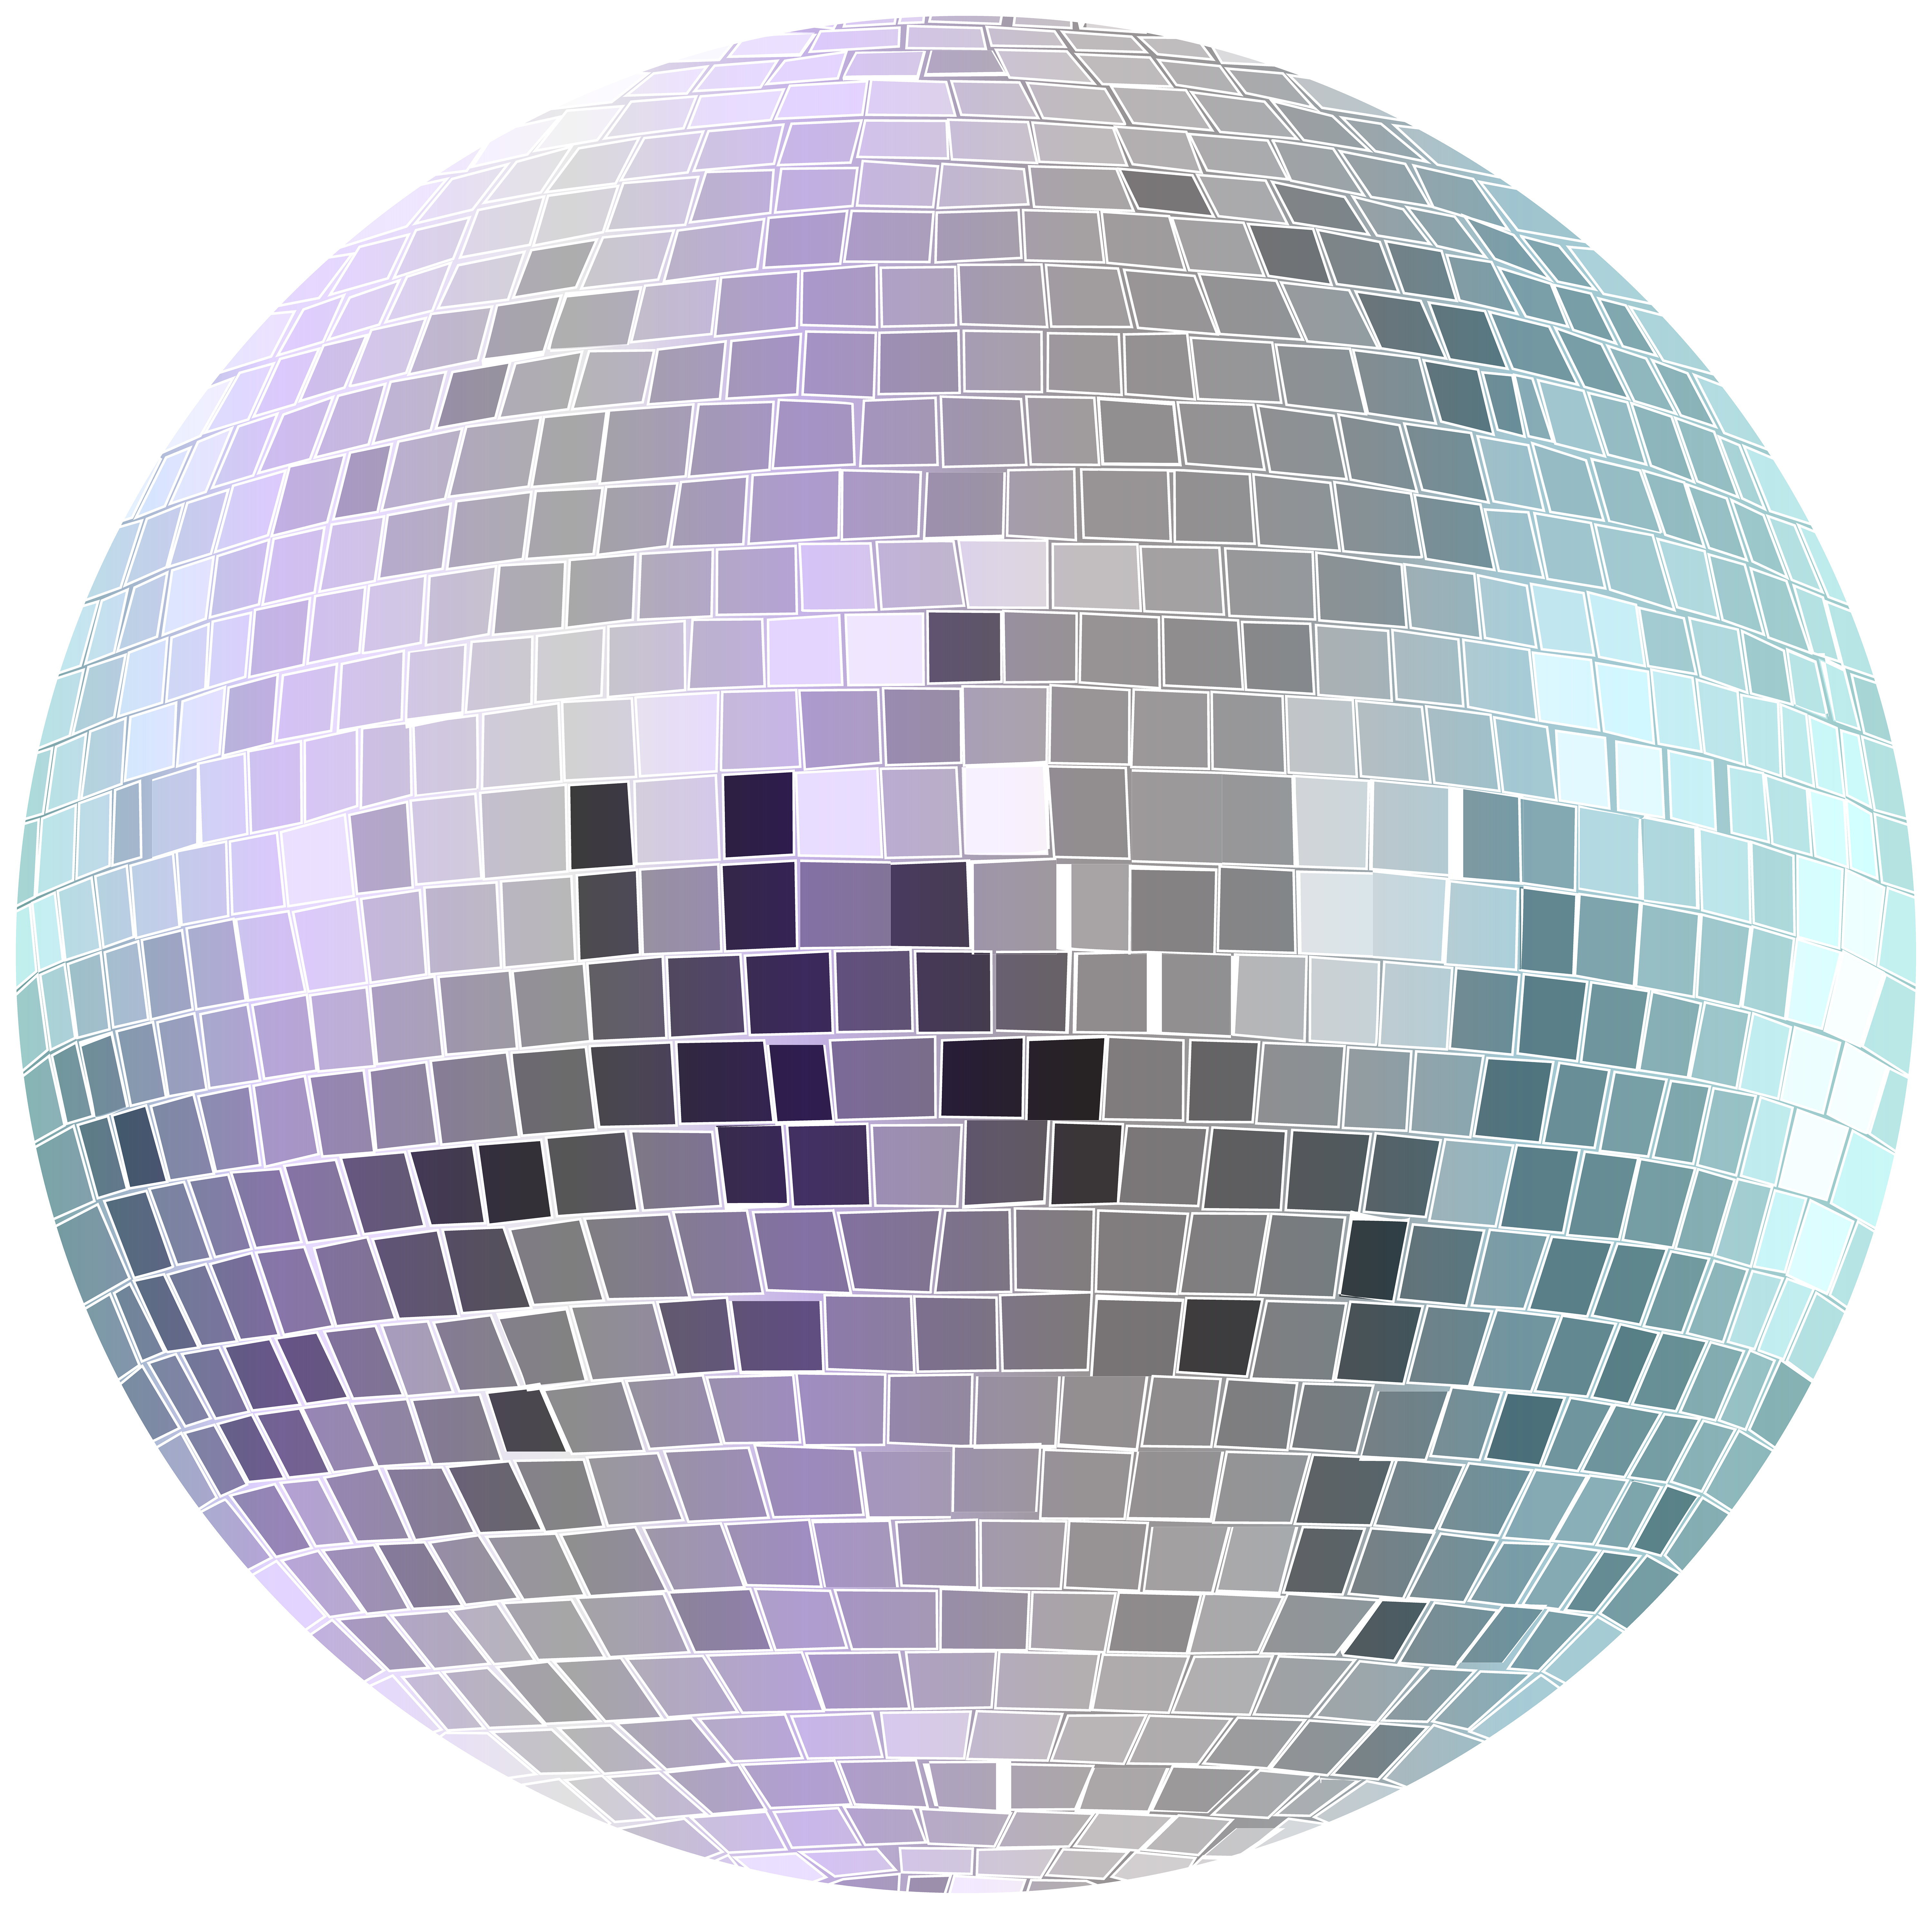 Disco Ball Png Clipart : Animated Disco Ball Clipart Free Images at.